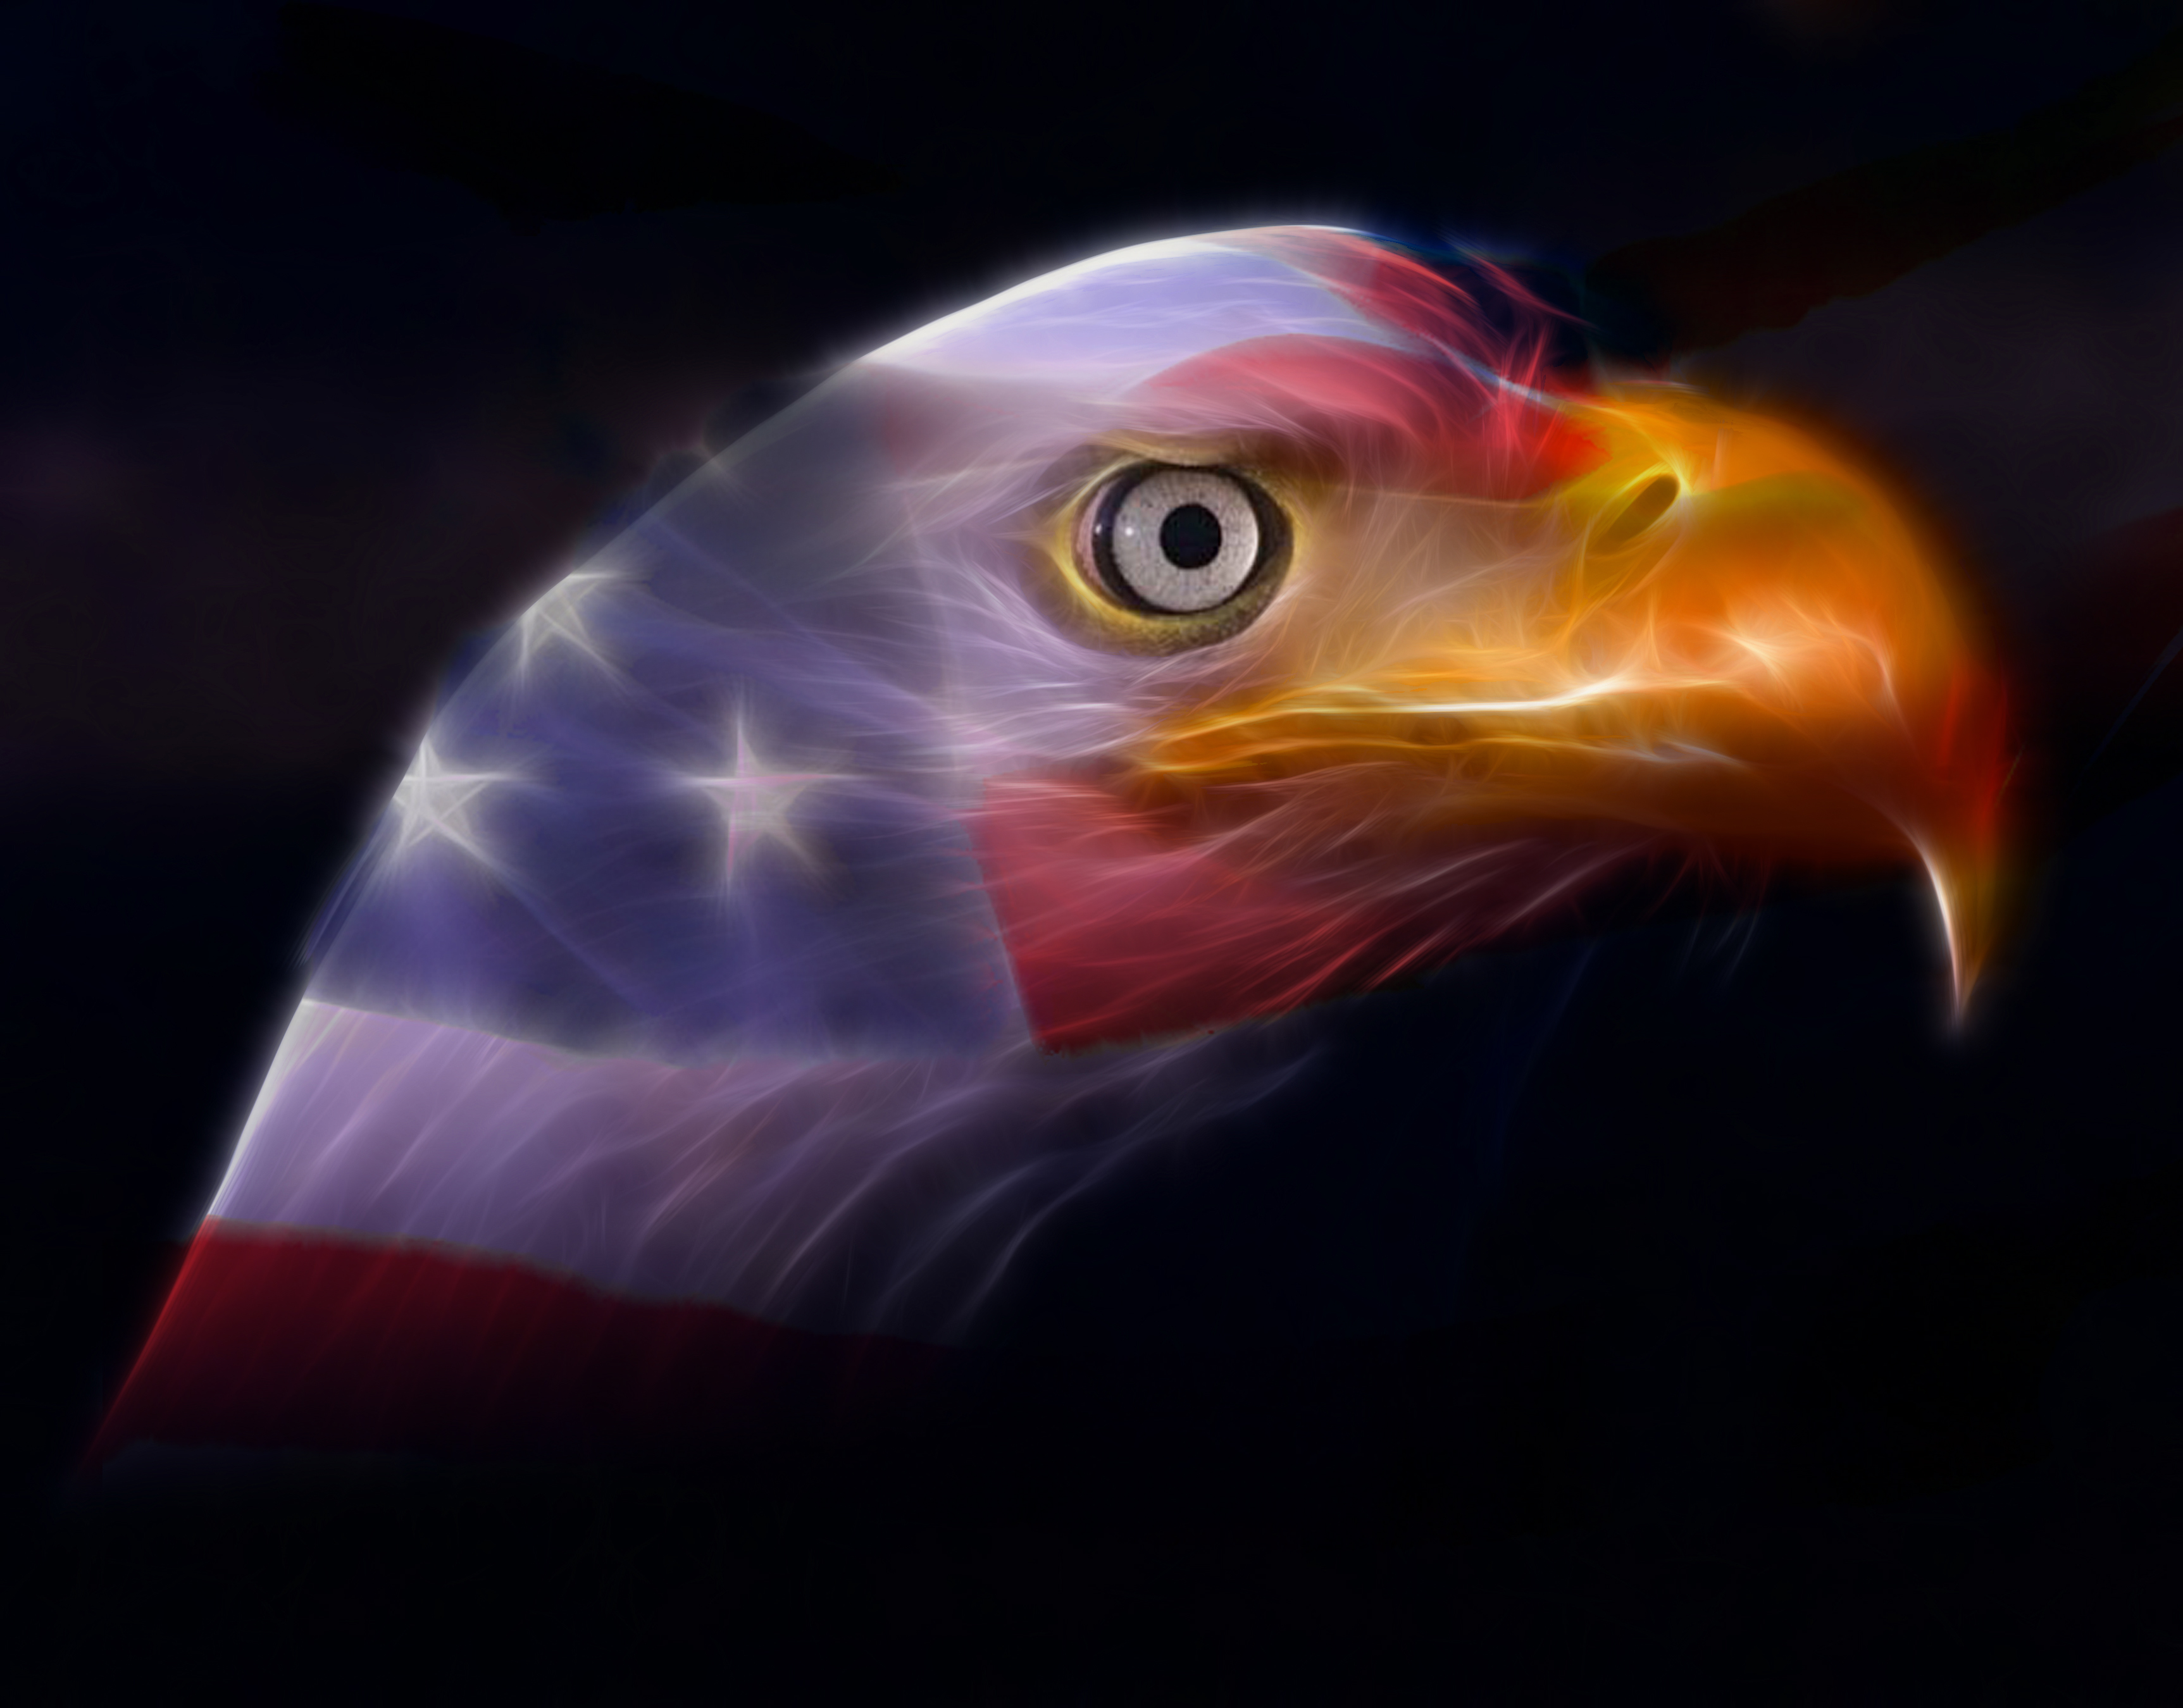 In Honor of Memorial Day 2009, the American Bald Eagle and the Red, White, and Blue of our Old Glory Flag. Land of the Free and Home of the Brave